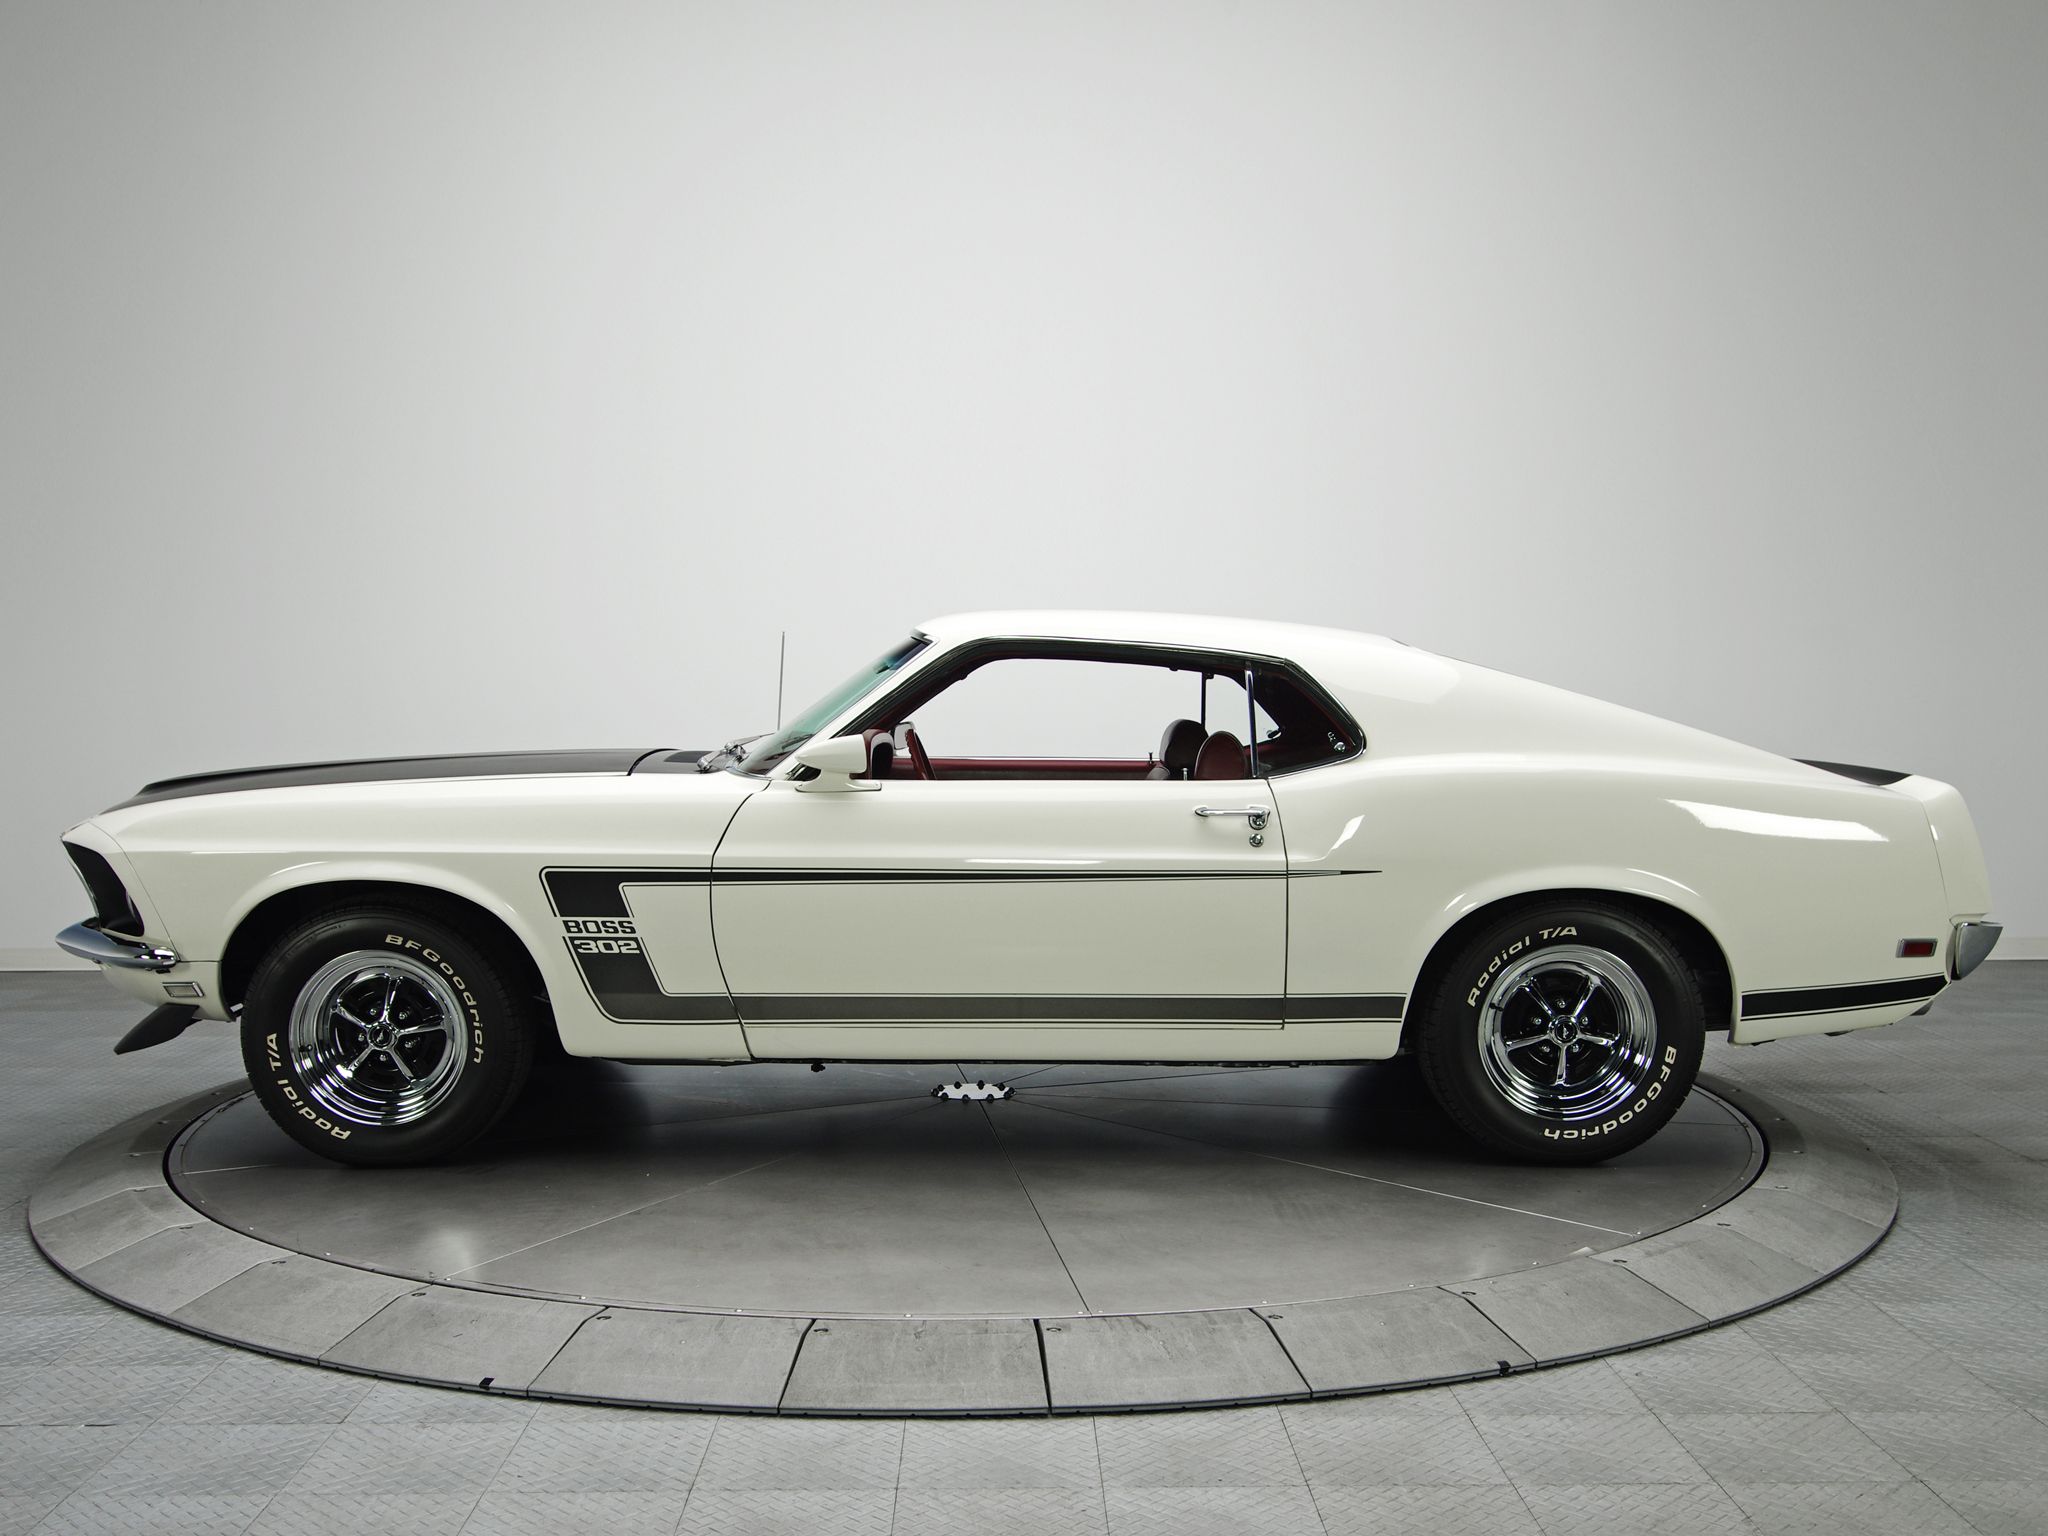 Ford Mustang Boss 1969 - image #105